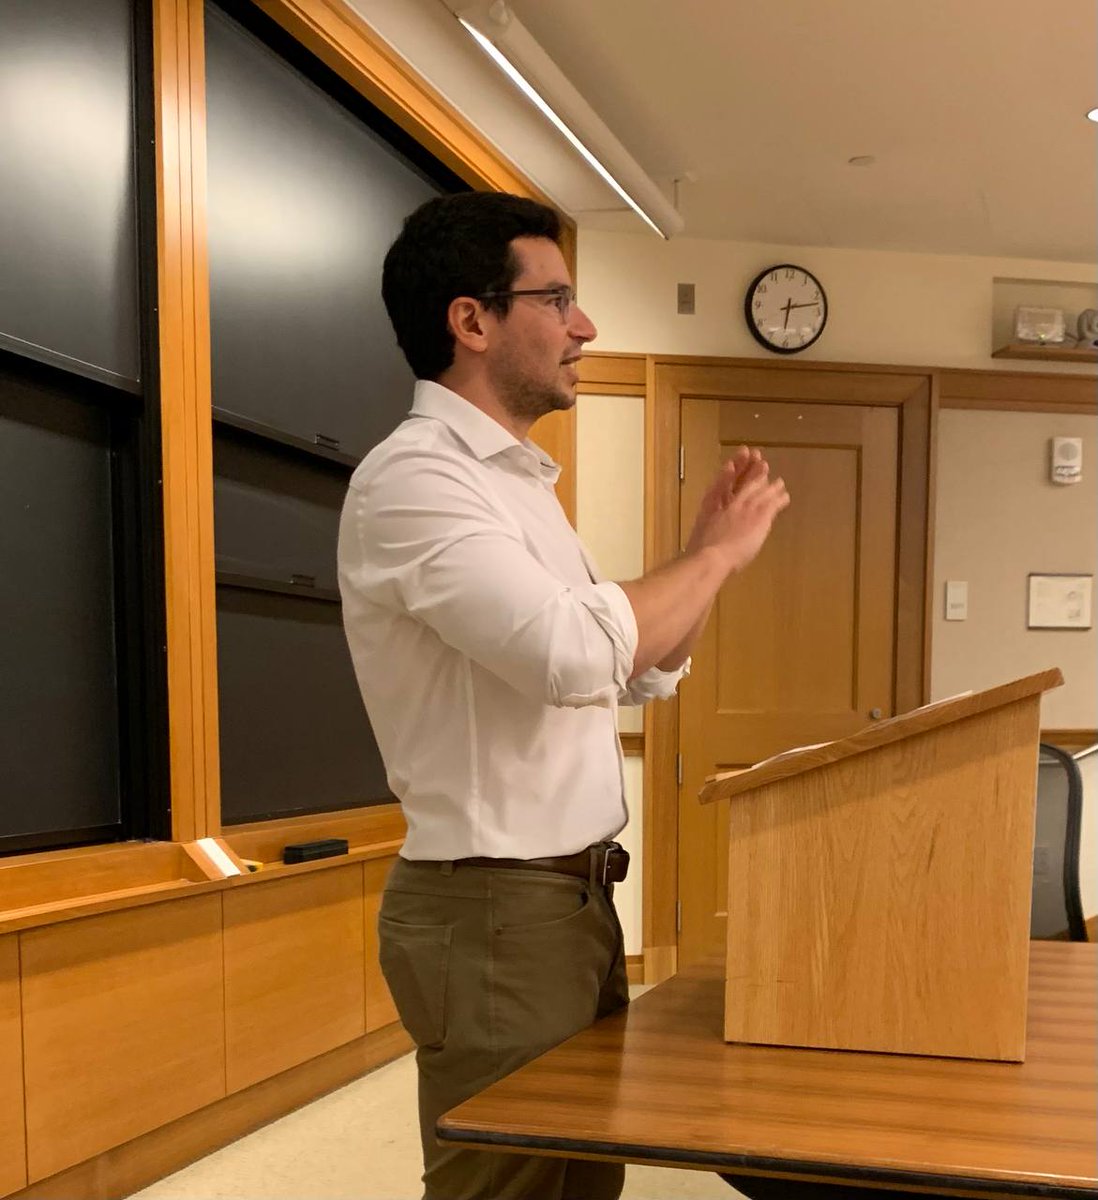 #BlockchainEducation This week, XinFin Advisor Professor Dustin Sebell spoke about crypto and the #XDCNetwork as a distinguished guest lecturer at @Harvard_Law To learn more, visit: hls.harvard.edu/courses/the-po…